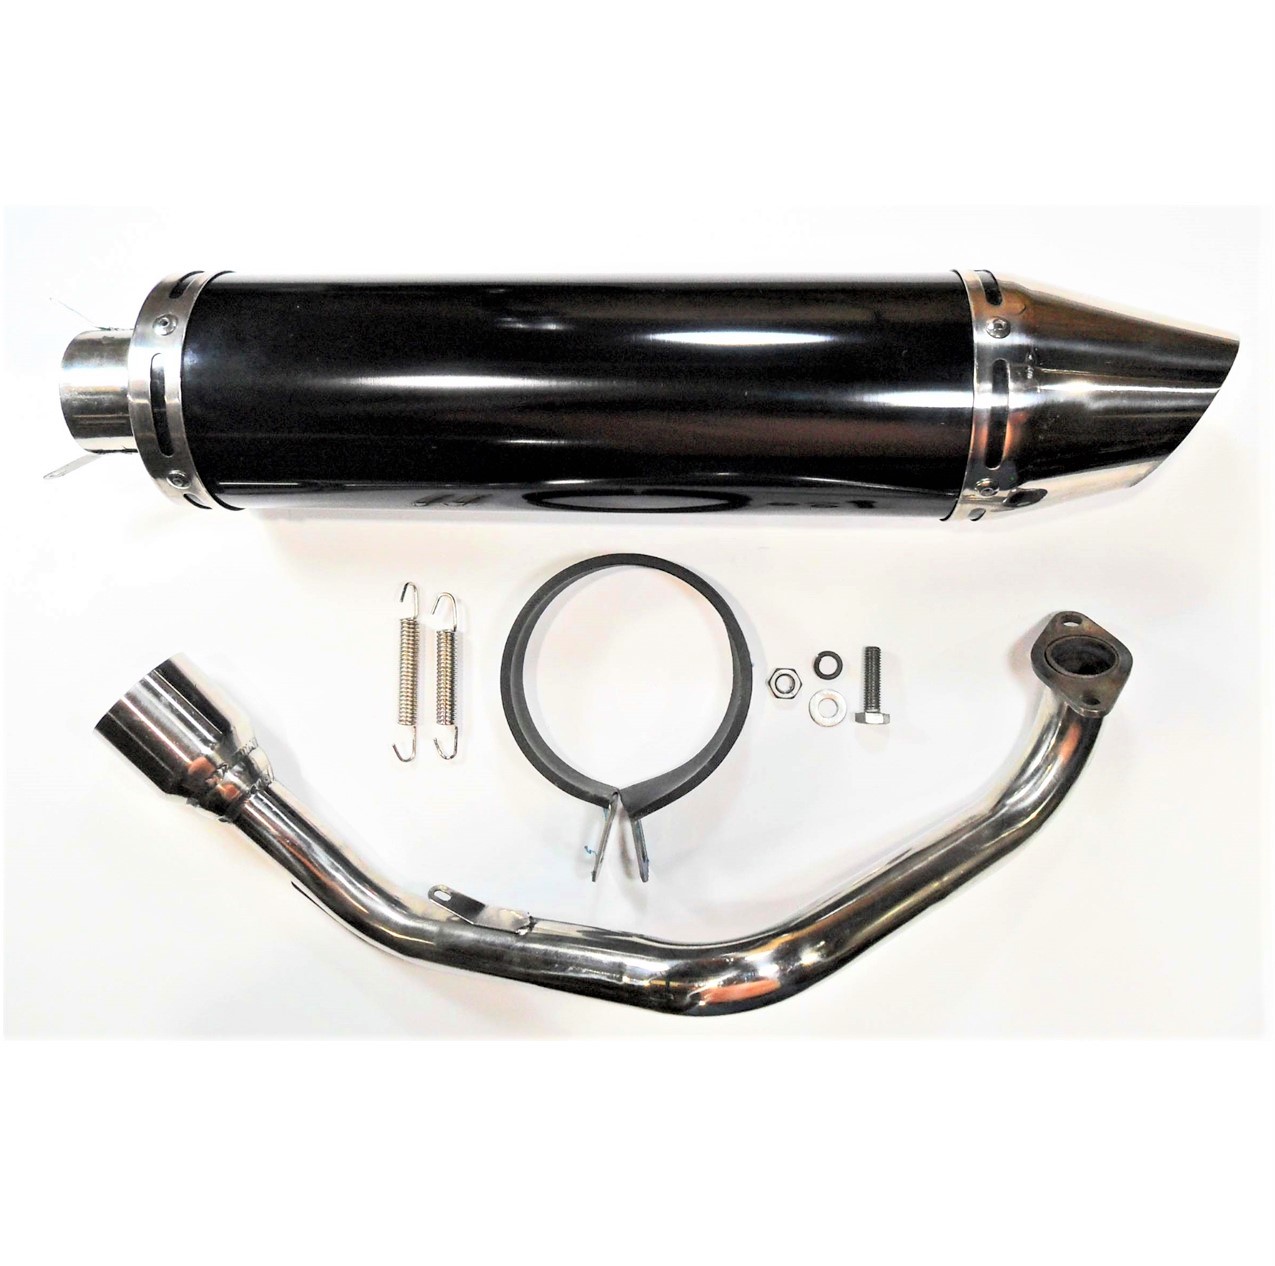 Exhaust Pipe HIGH PERFORMANCE - BLACK/CHROME Fits Most GY6-125, GY6-150 Chinese Scooters Canister Length (including tip)=17 1/4" Canister Diameter=4"